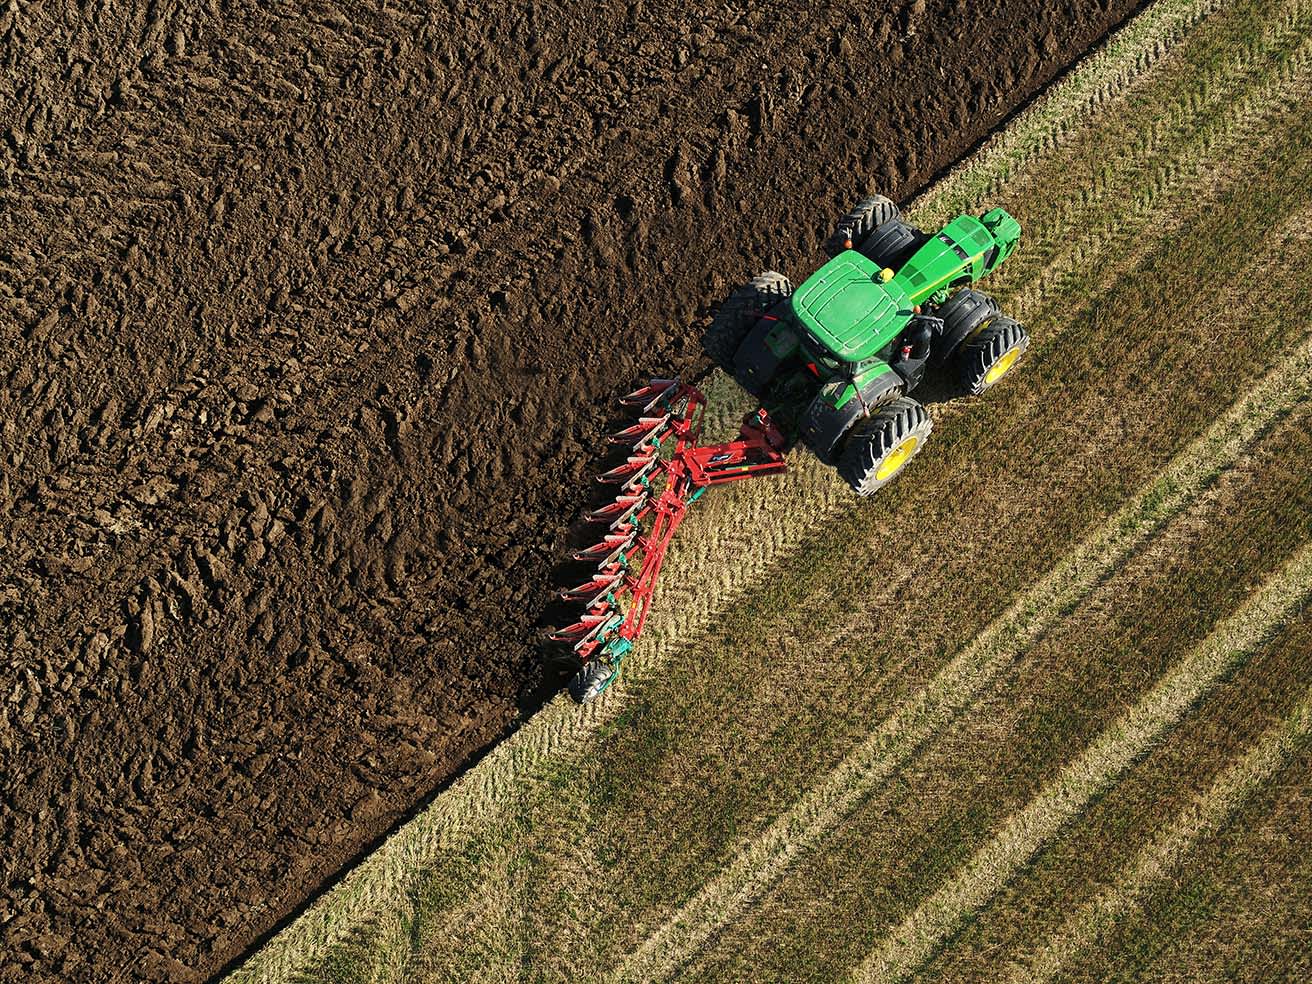 THE VIRTUAL CIRCLE OF PLOUGHING – HUMUS AND CO2 STORAGE